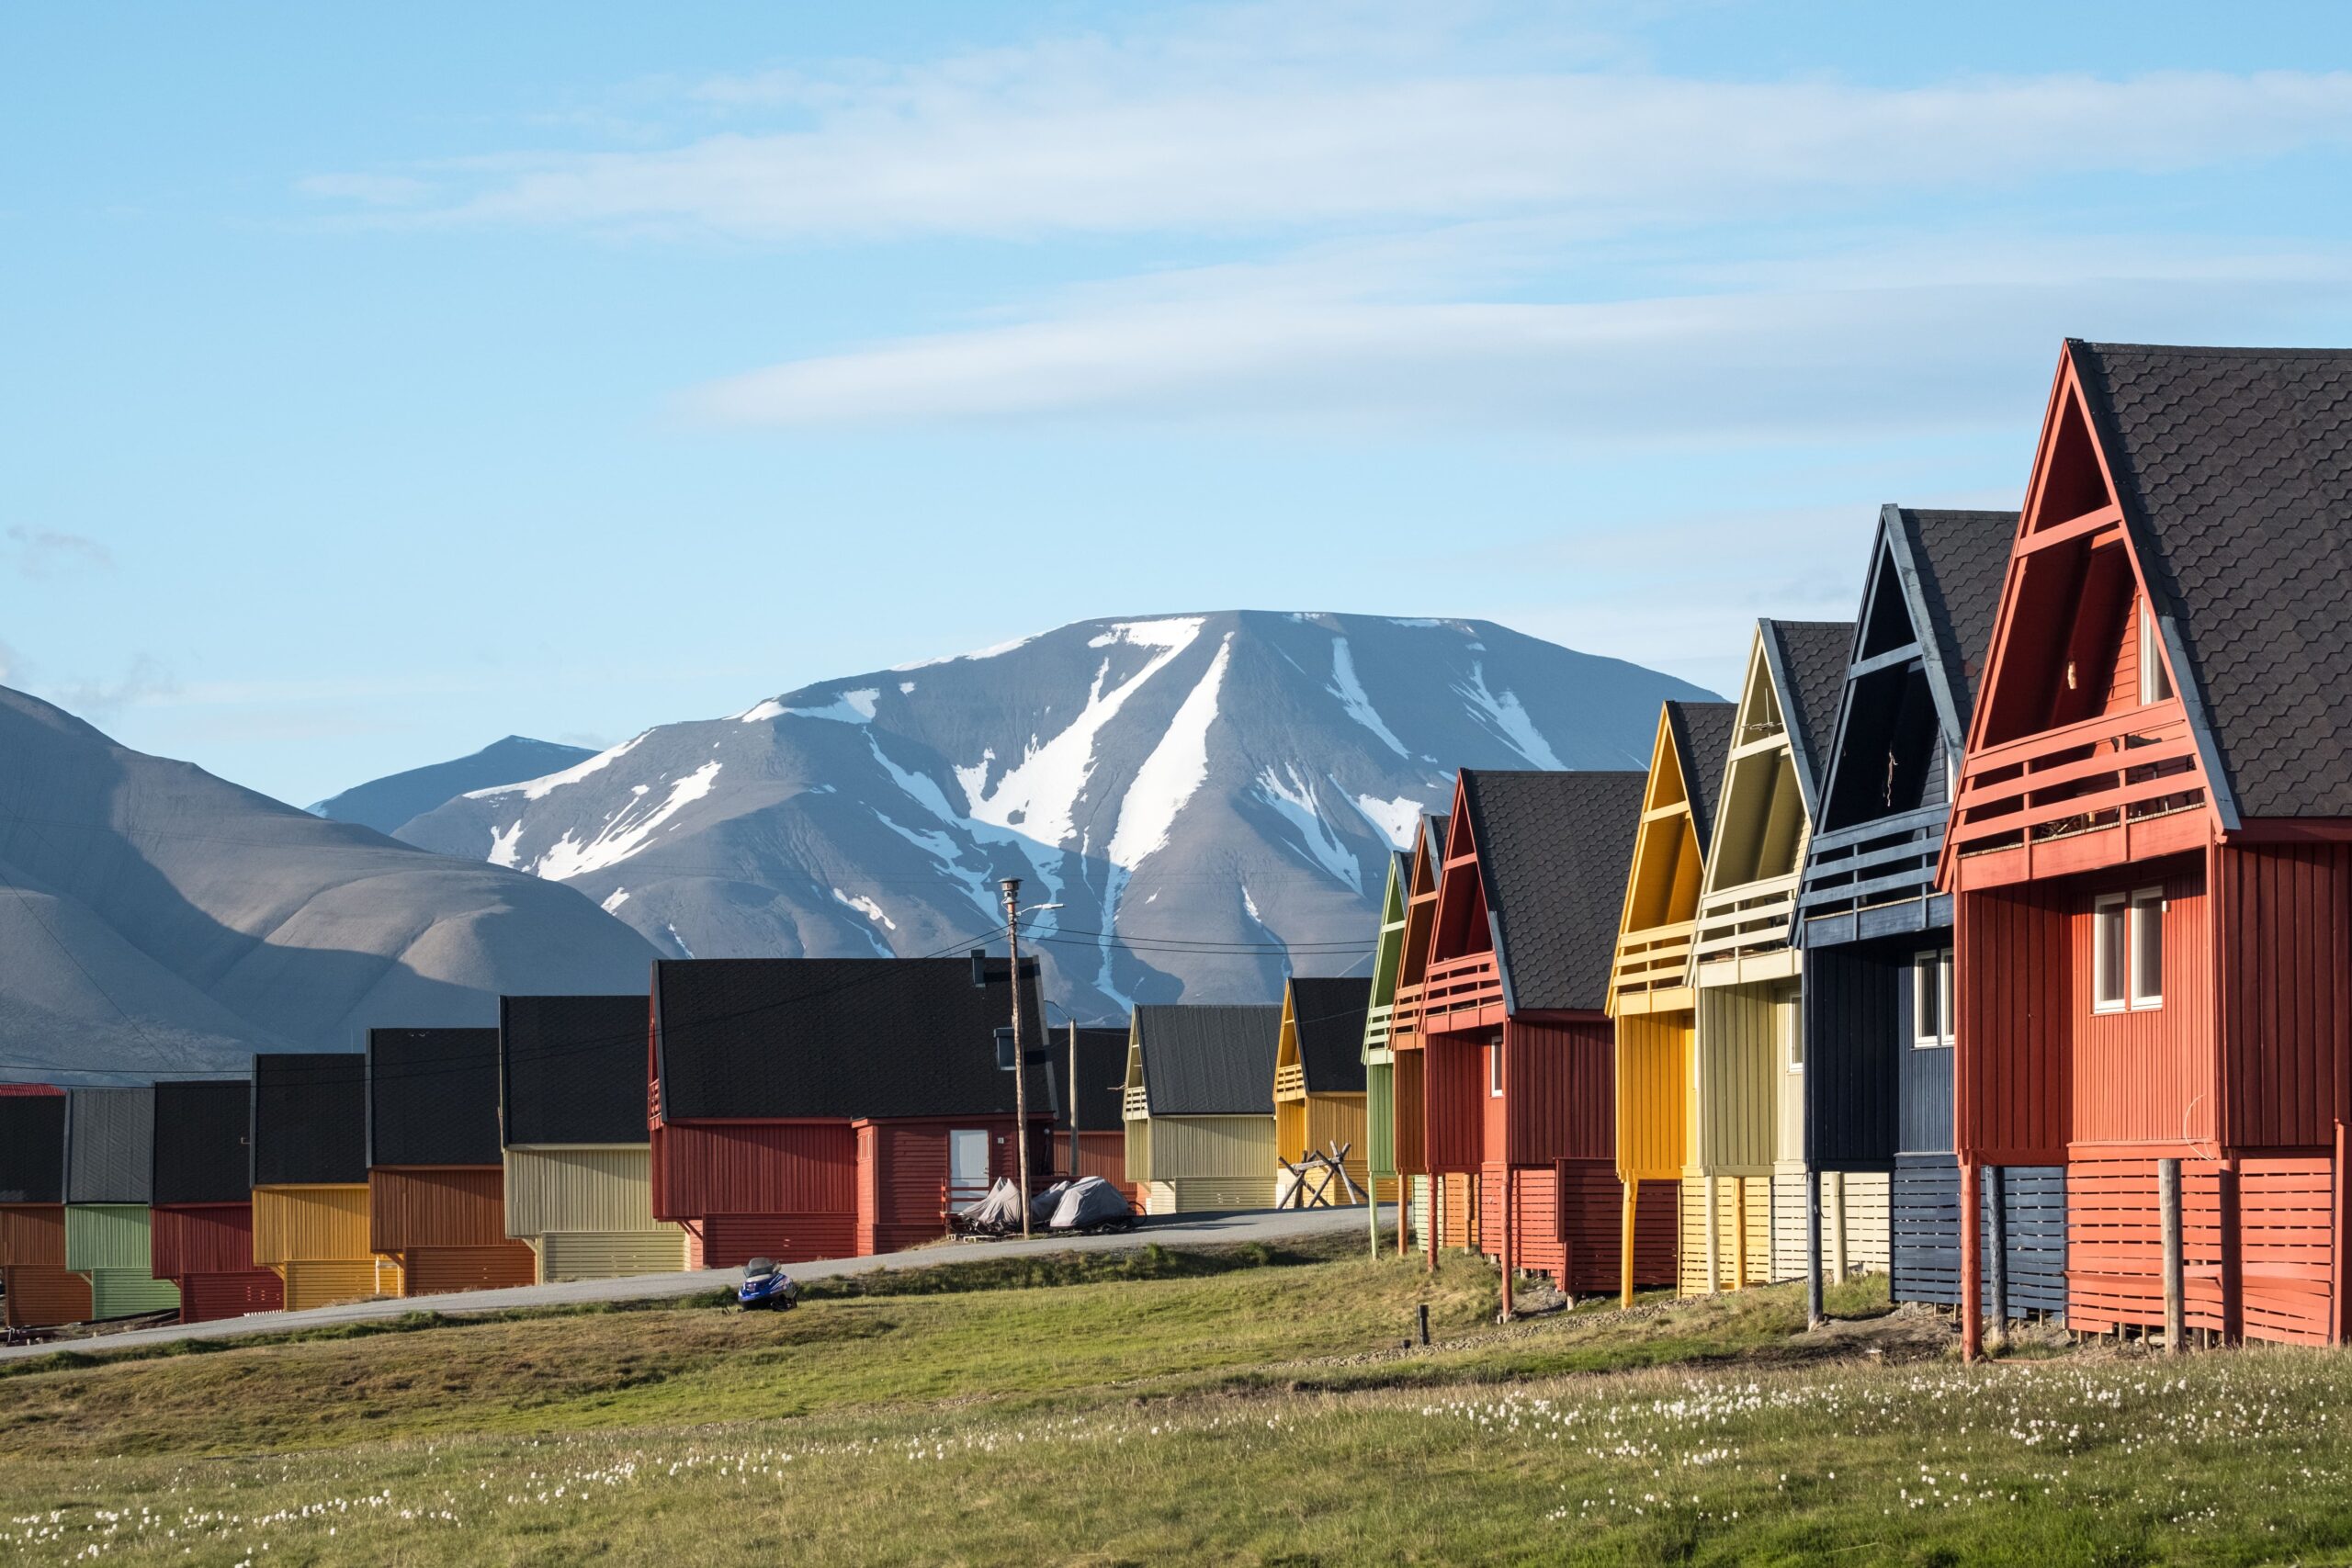 Many small colorful houses on a green lawn with a gray mountain and blue sky in the background